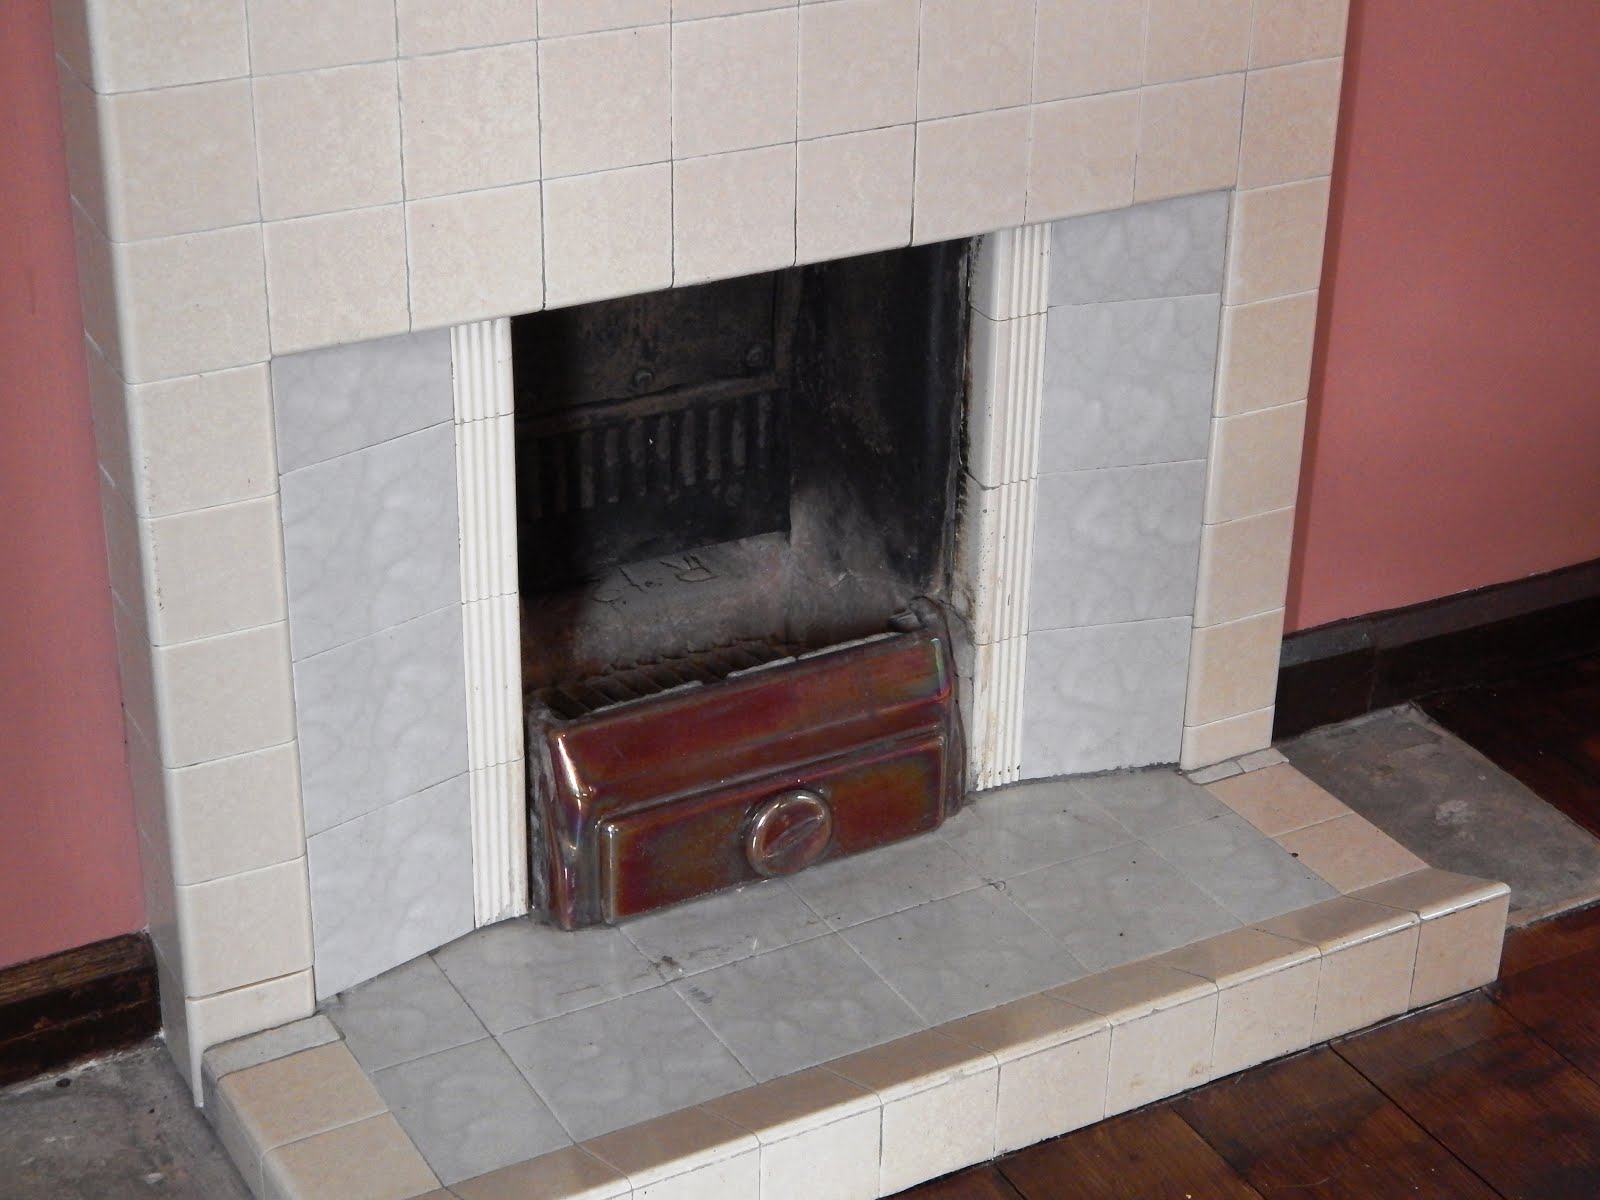 Remember fireplaces like this?